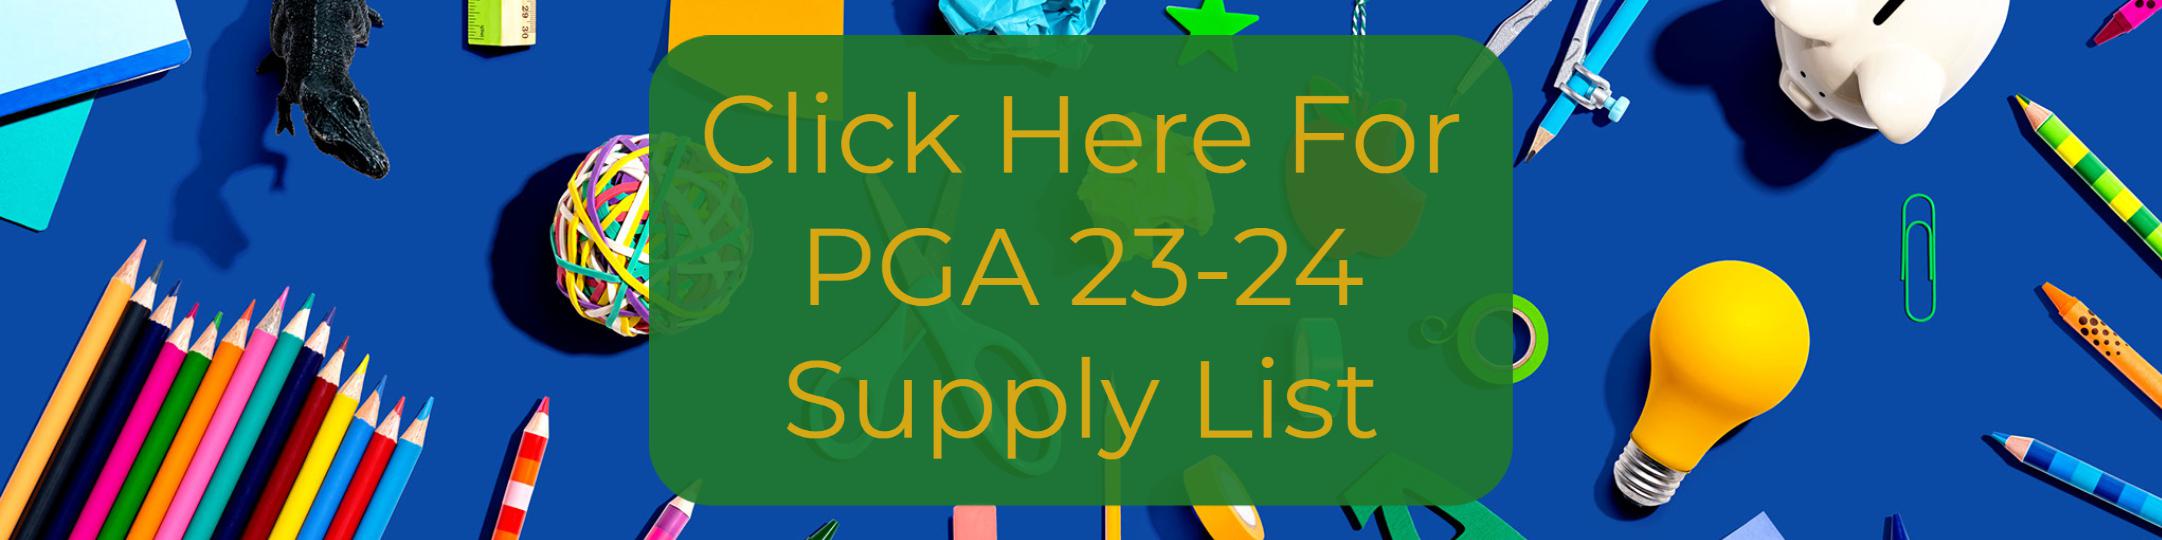 Click here for PGA 23-24 Supply List